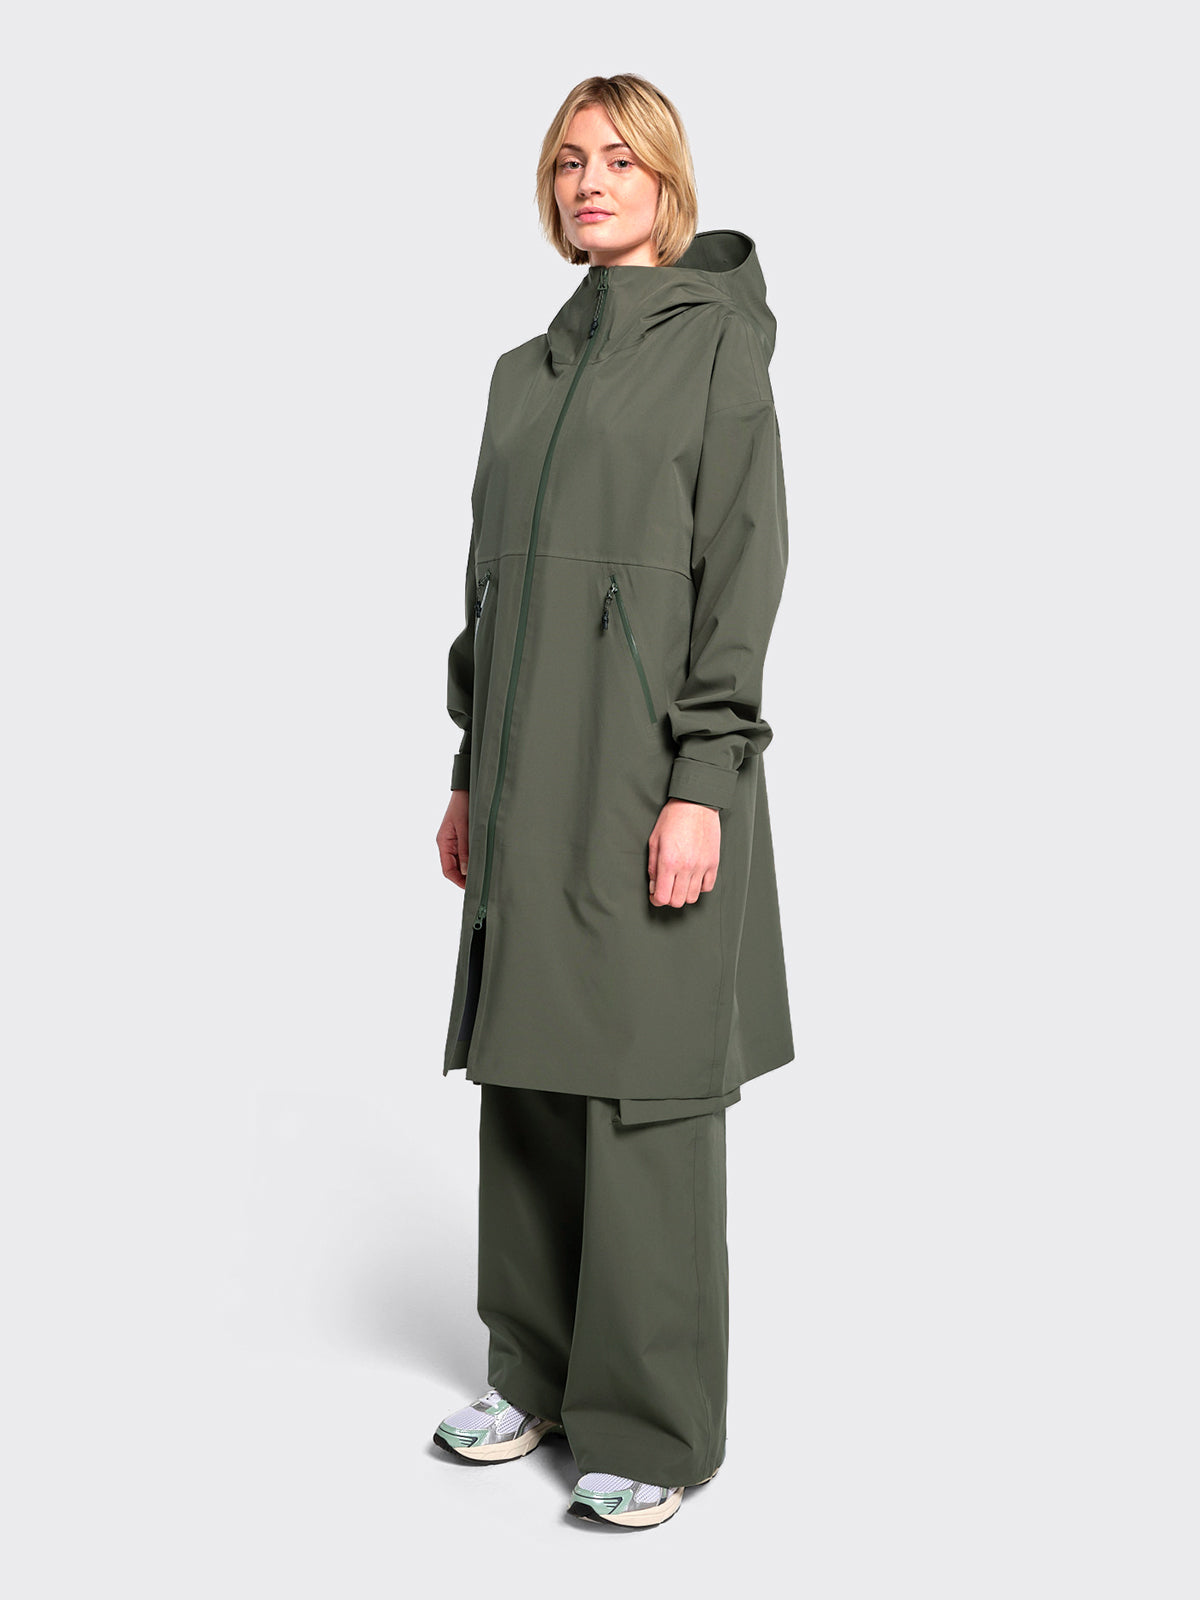 Woman wearing Rovde coat by blæst in the color Vetiver